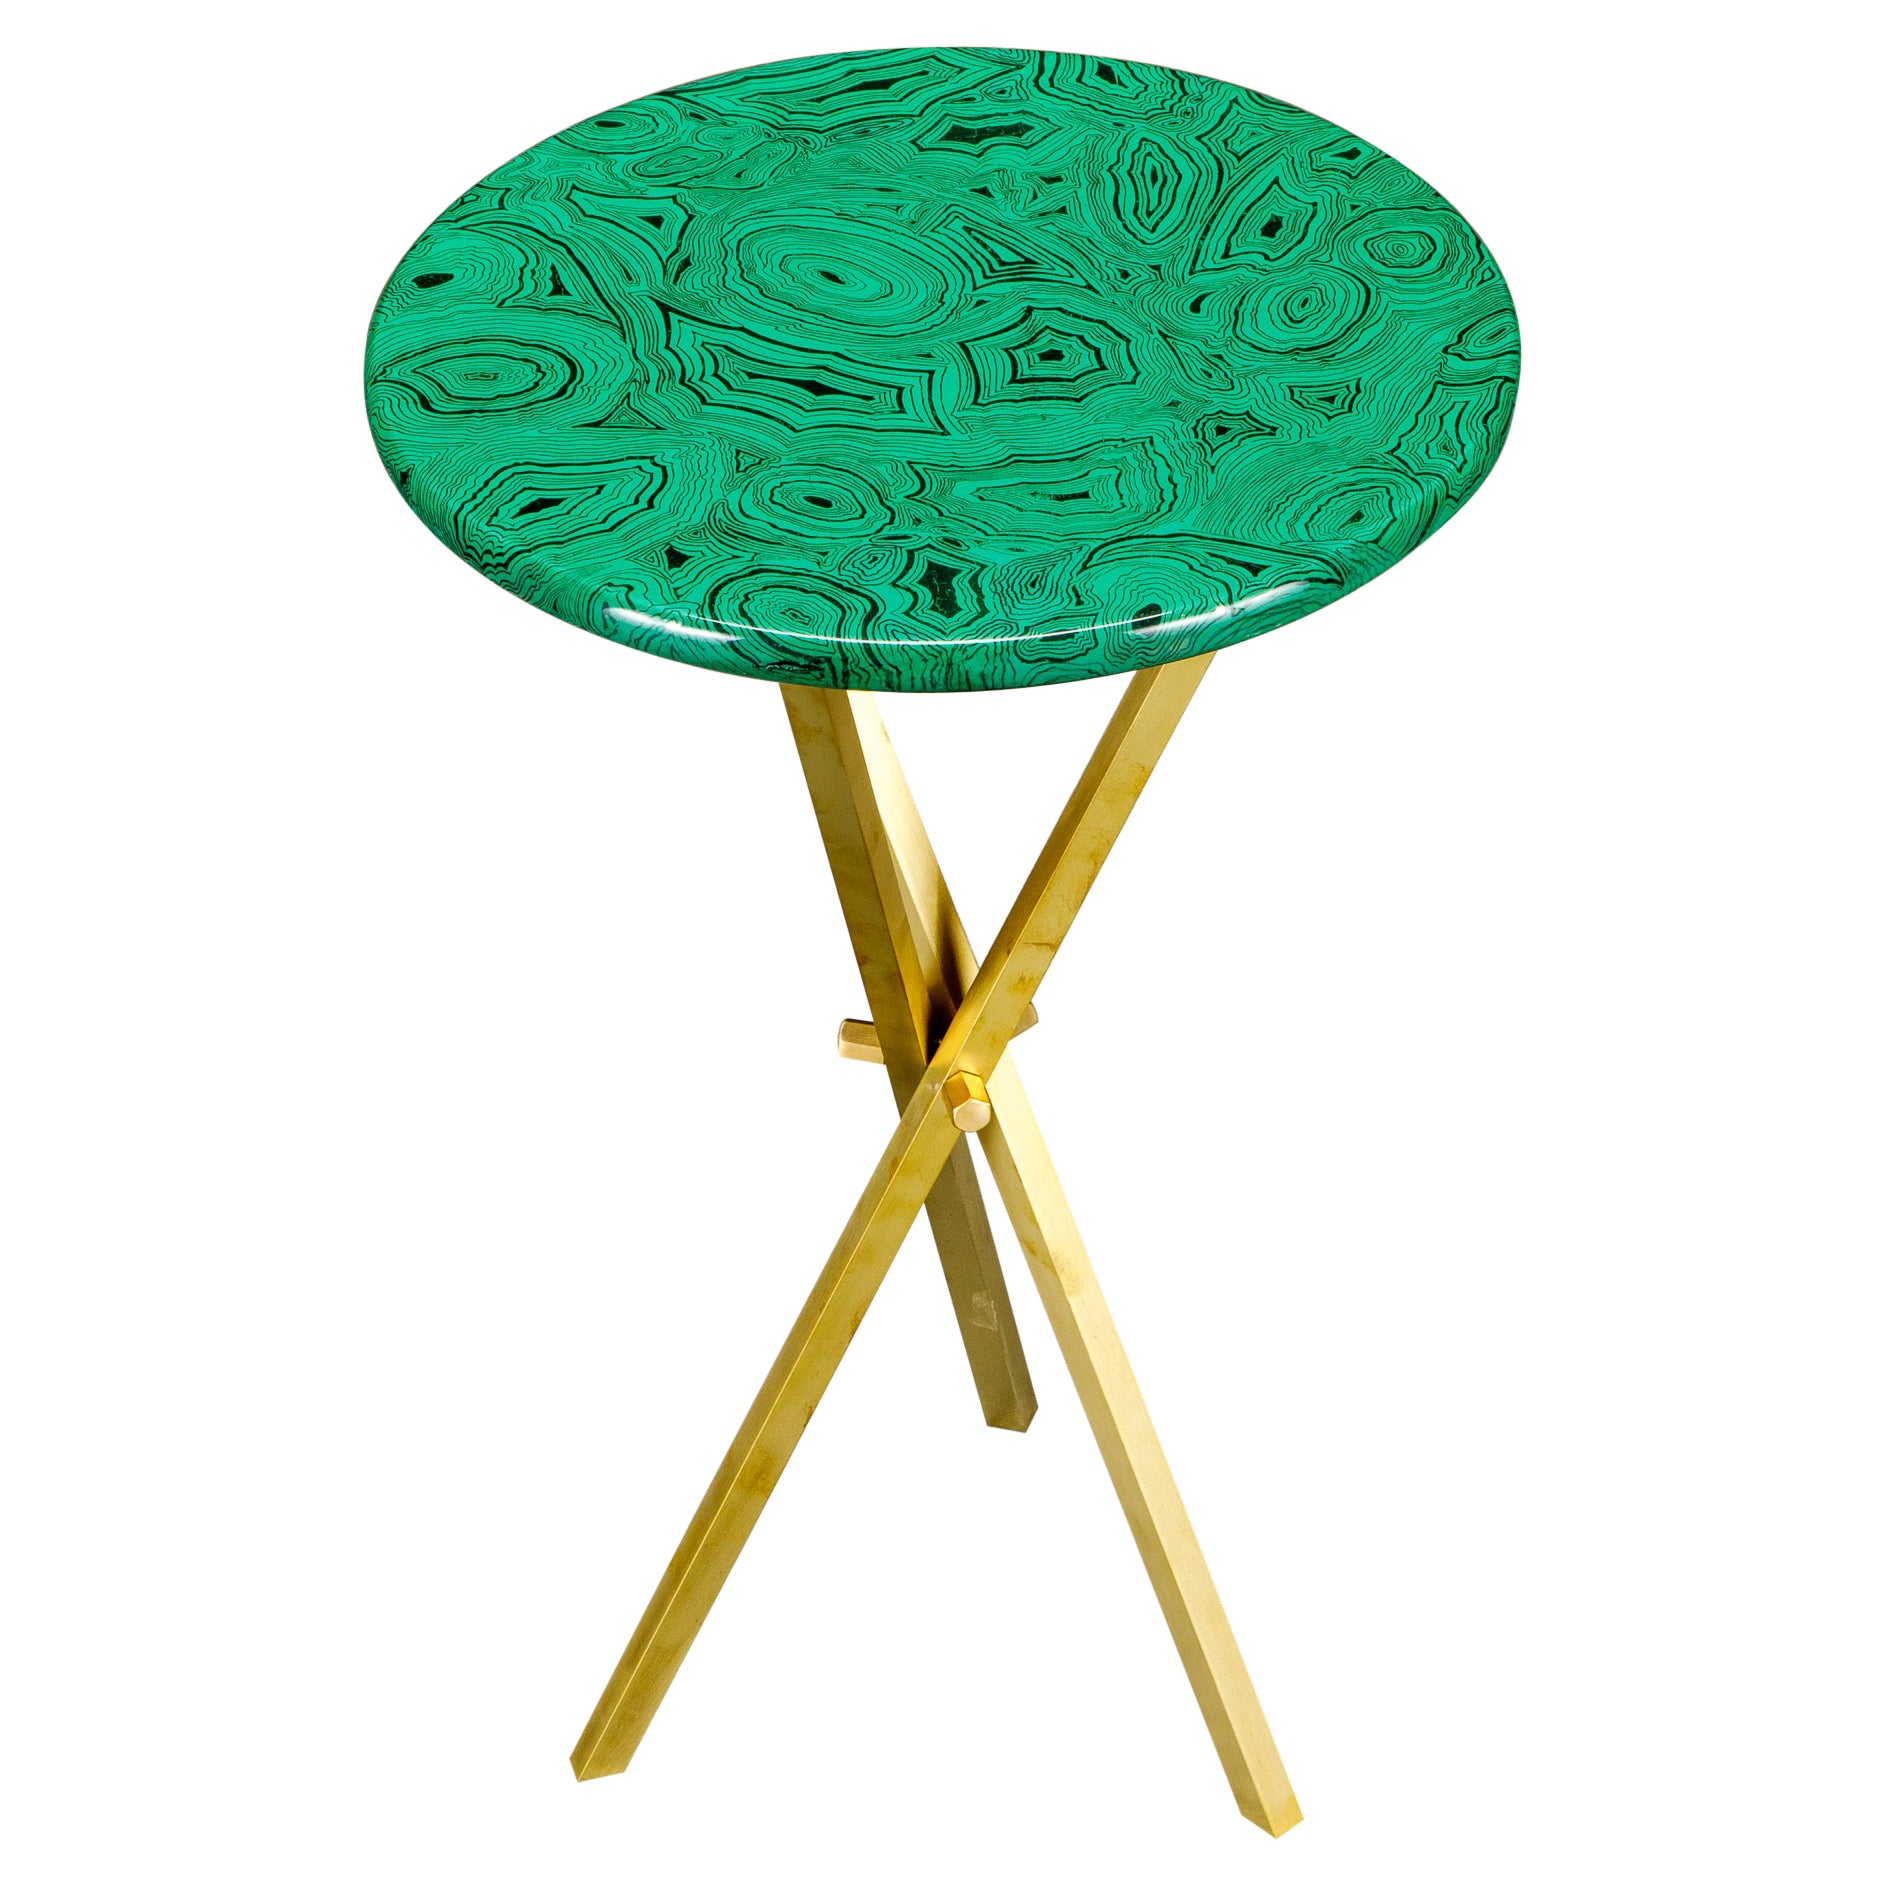 'Malachite' and Brass Side Table by Piero Fornasetti, circa 1970s, Signed 